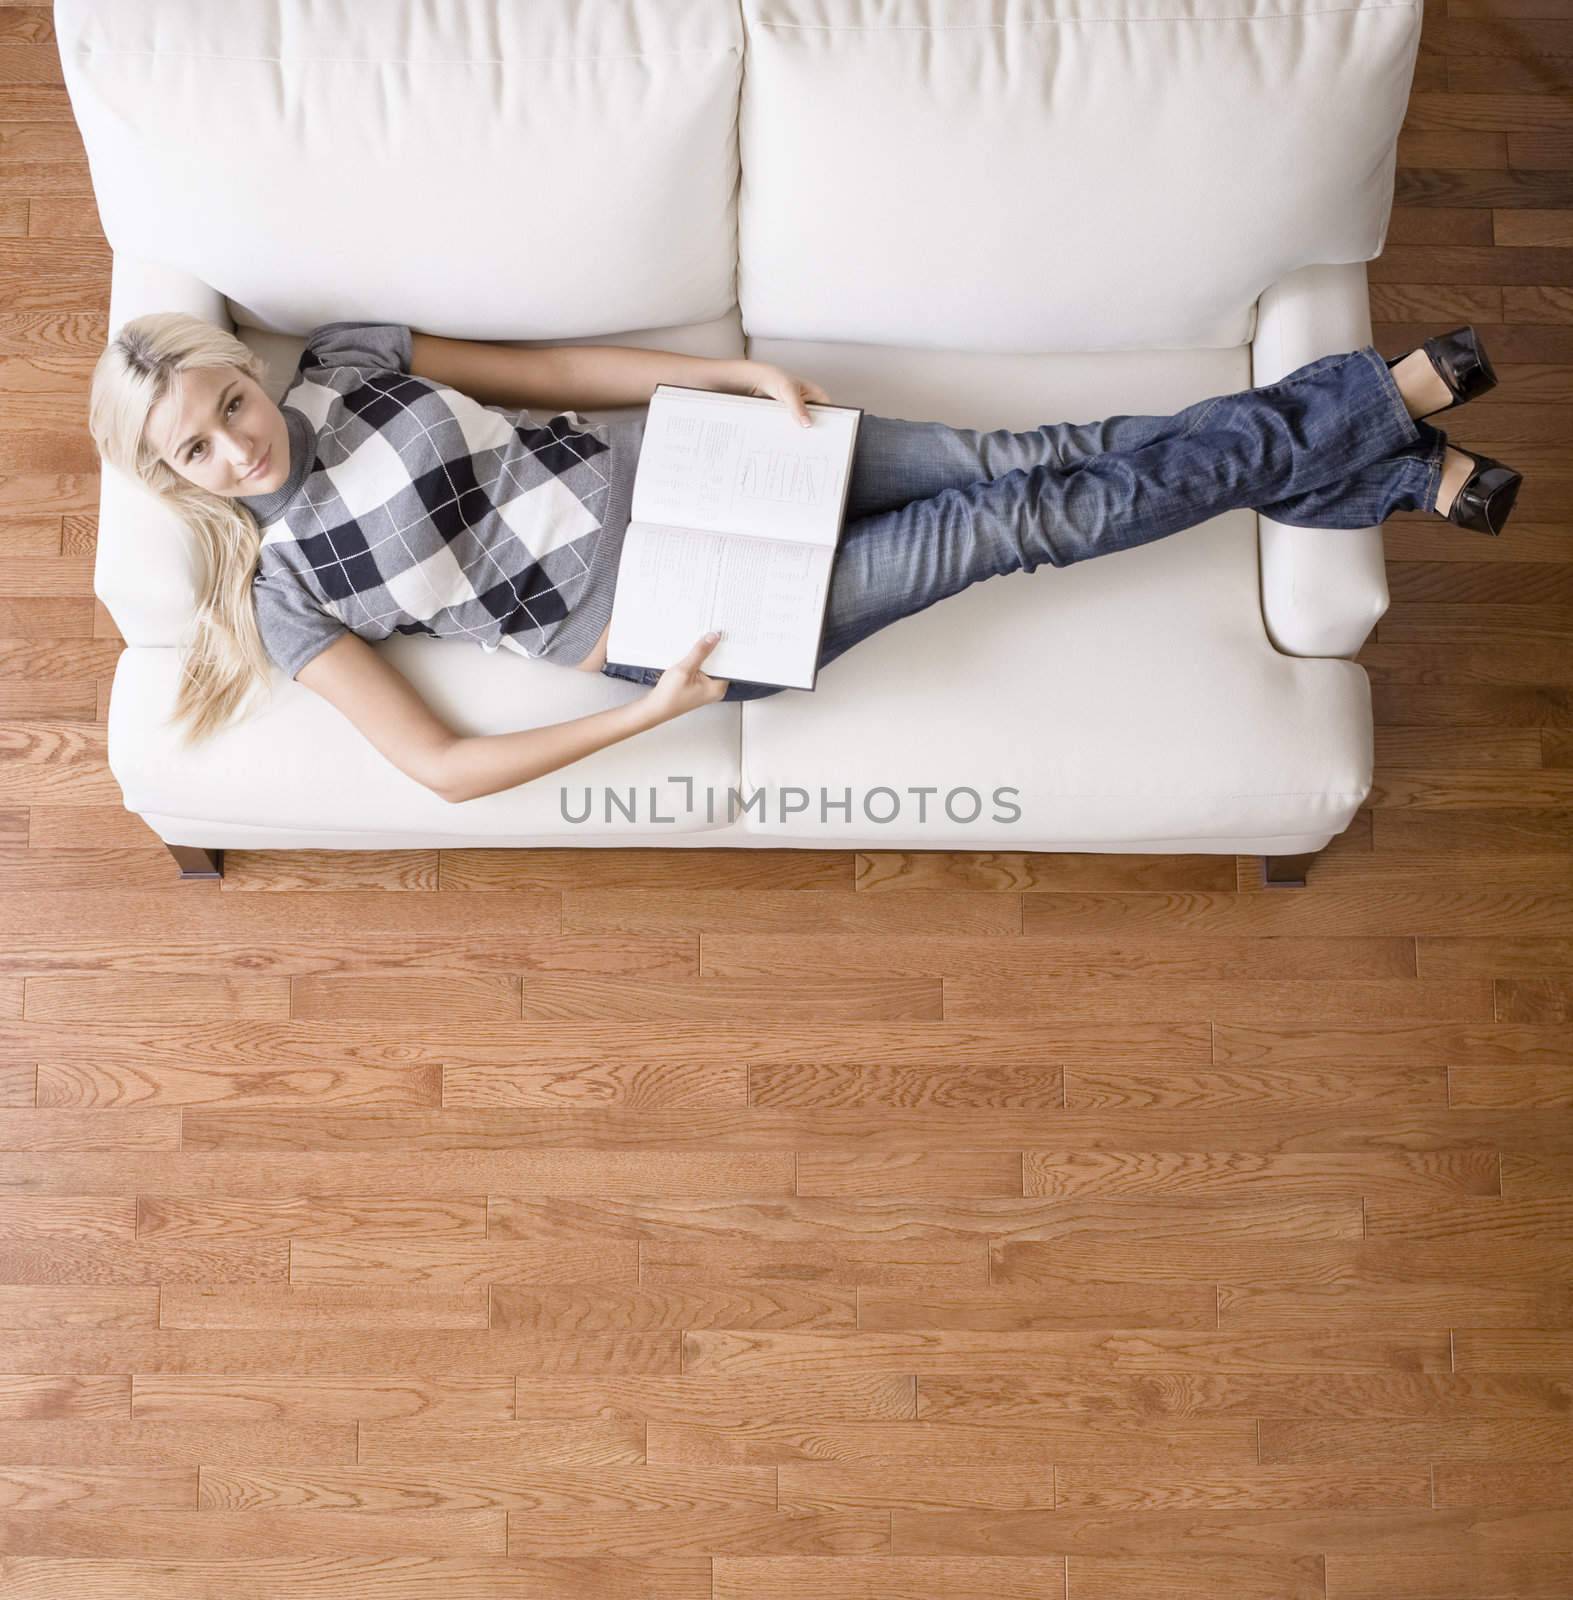 Full length overhead view of woman reclining on white couch with a book, as she looks up at the camera. Square format.